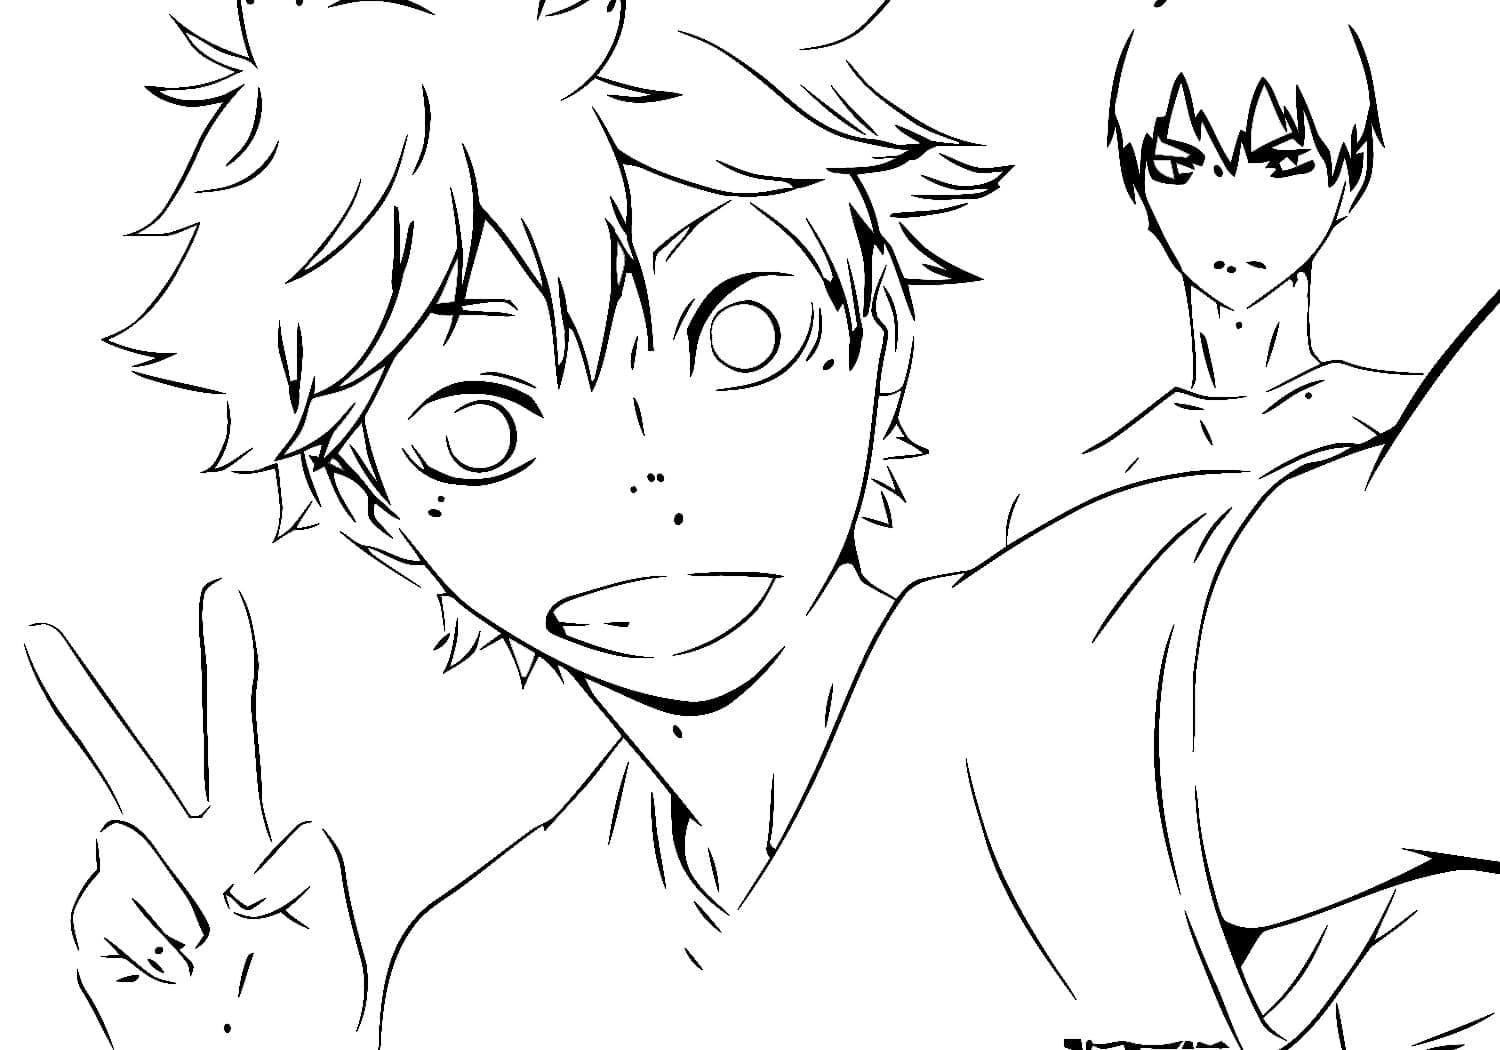 Grab Catchy Haikyuu Coloring Pages You’ll Love